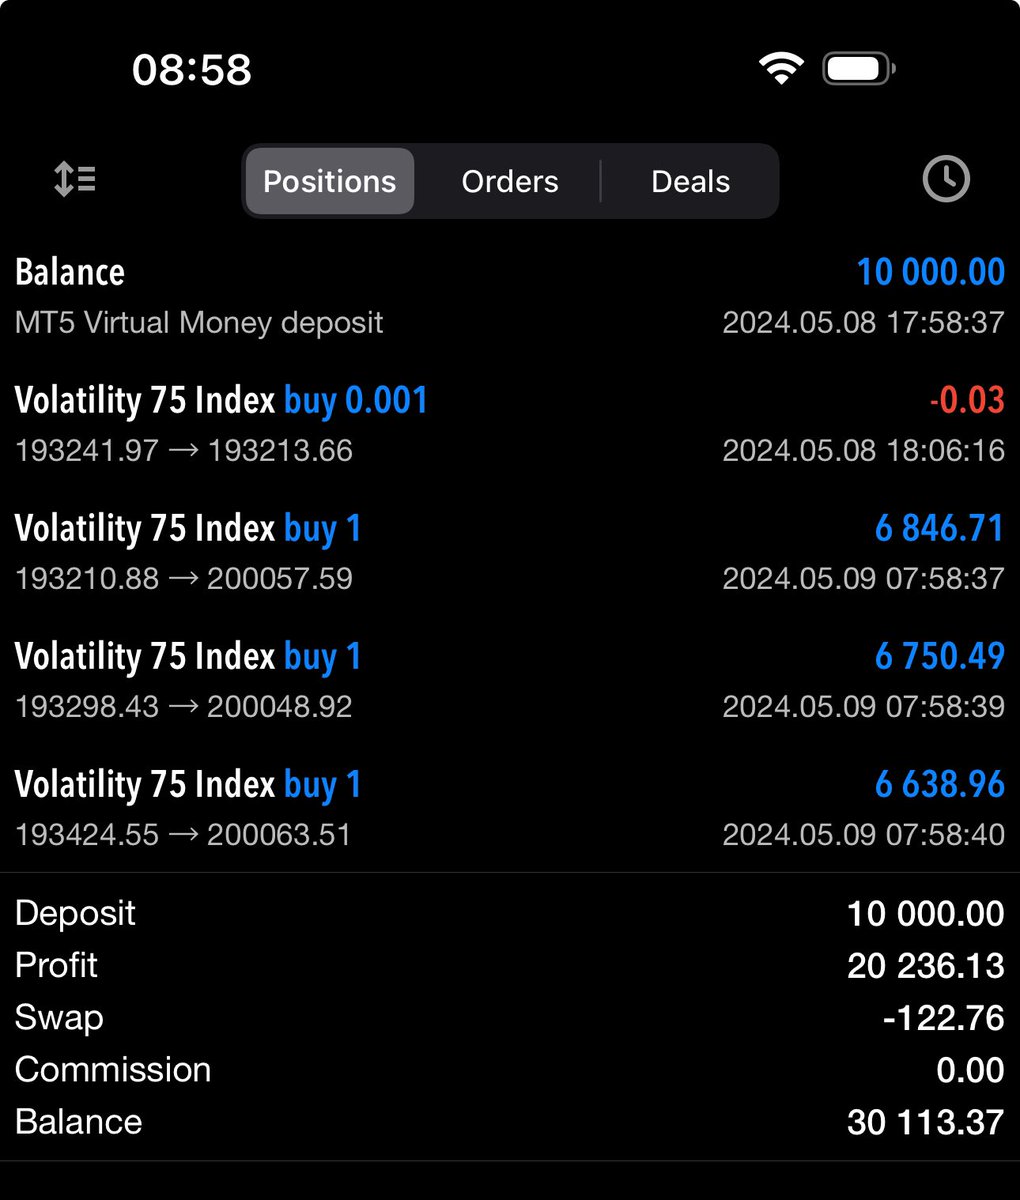 Meanwhile, i dusted off my Deriv account, made a $10K DEMO account to play with until i’m ready to start depositing on it to start flipping aggressively on synthetics. 

200% flipped. Yeah i know it’s demo, blah blah blah, but my TA skills is not to be messed with. 

Tell 01C,…